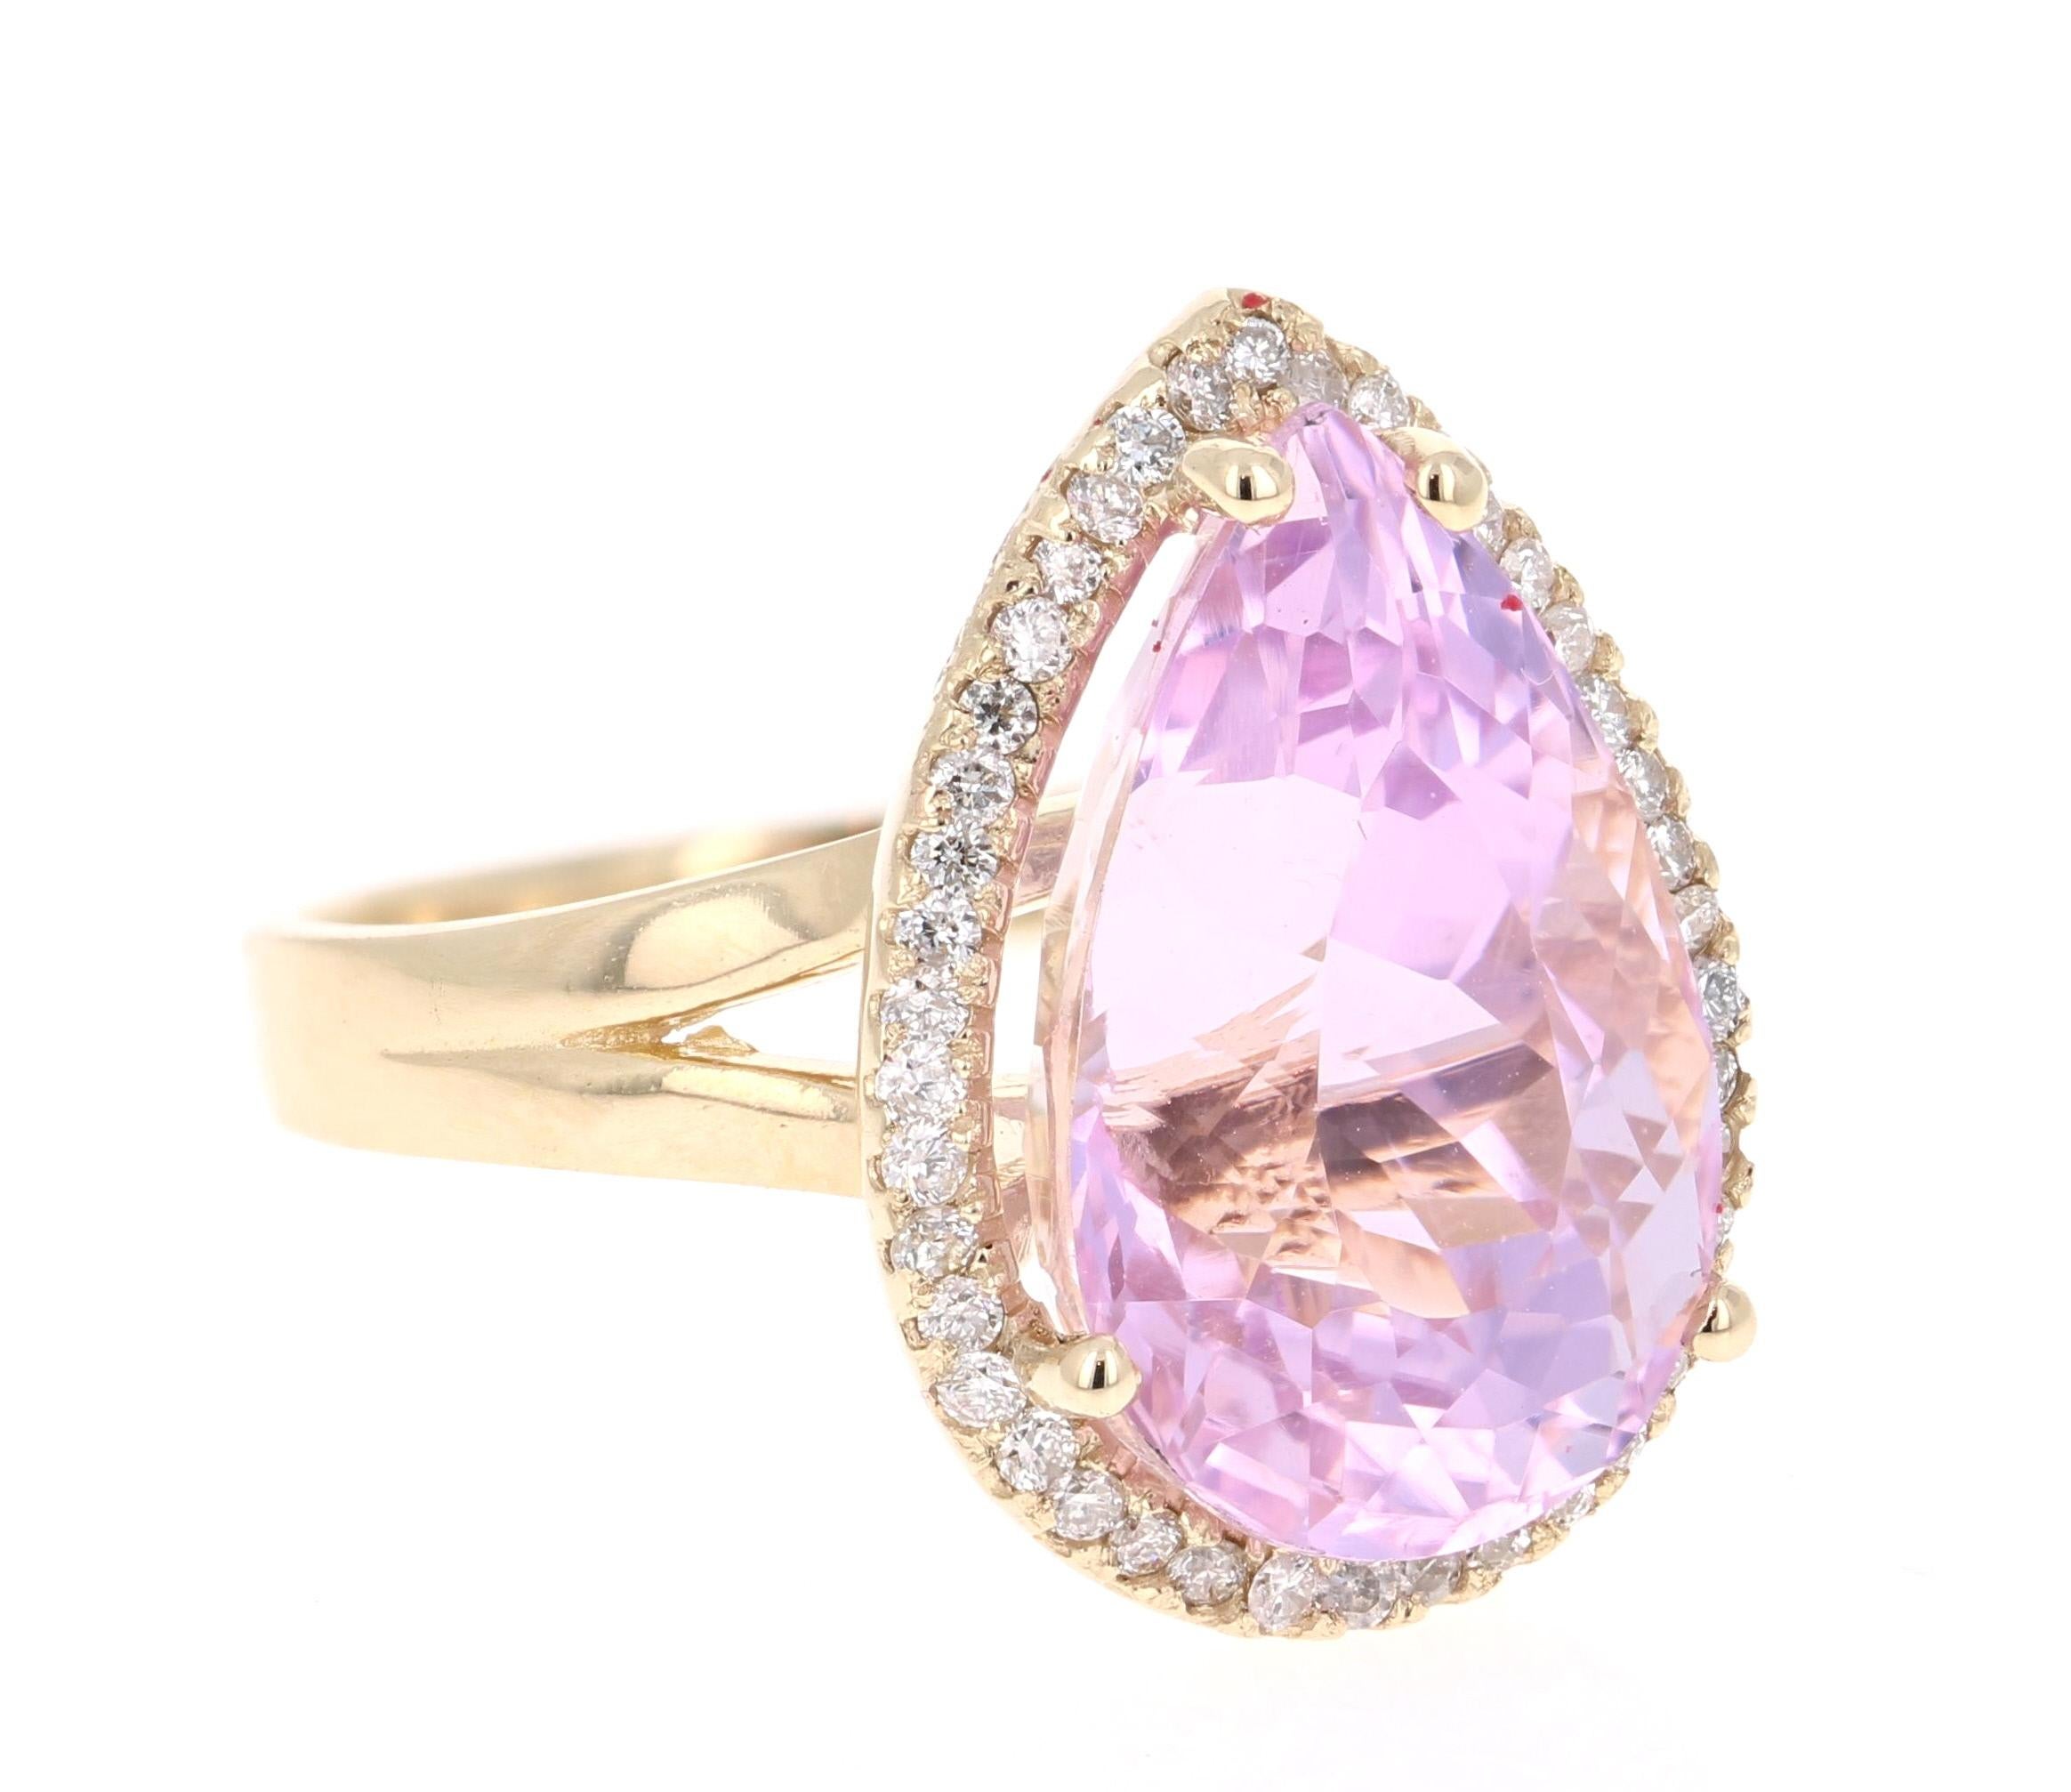 A lovely Engagement Ring Option or as an alternate to a Pink Diamond Ring! 

This simply stunning Kunzite Diamond Ring has a 11.46 Carat Pear Cut Kunzite as its center and has a beautiful simple halo of 42 Round Cut Diamonds that weigh 0.37 carats